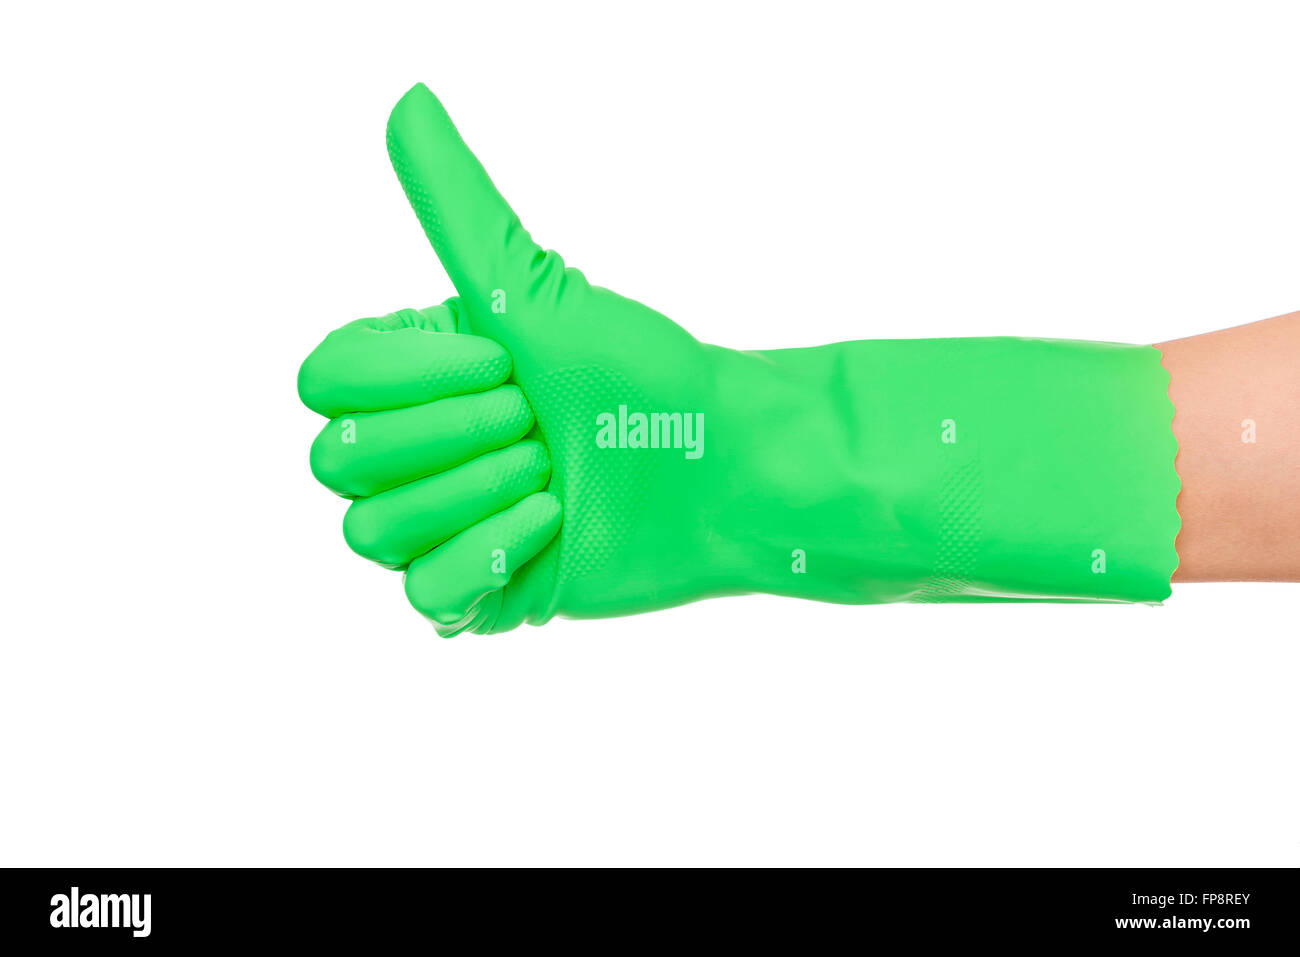 OK sign hand in a green glove. Stock Photo